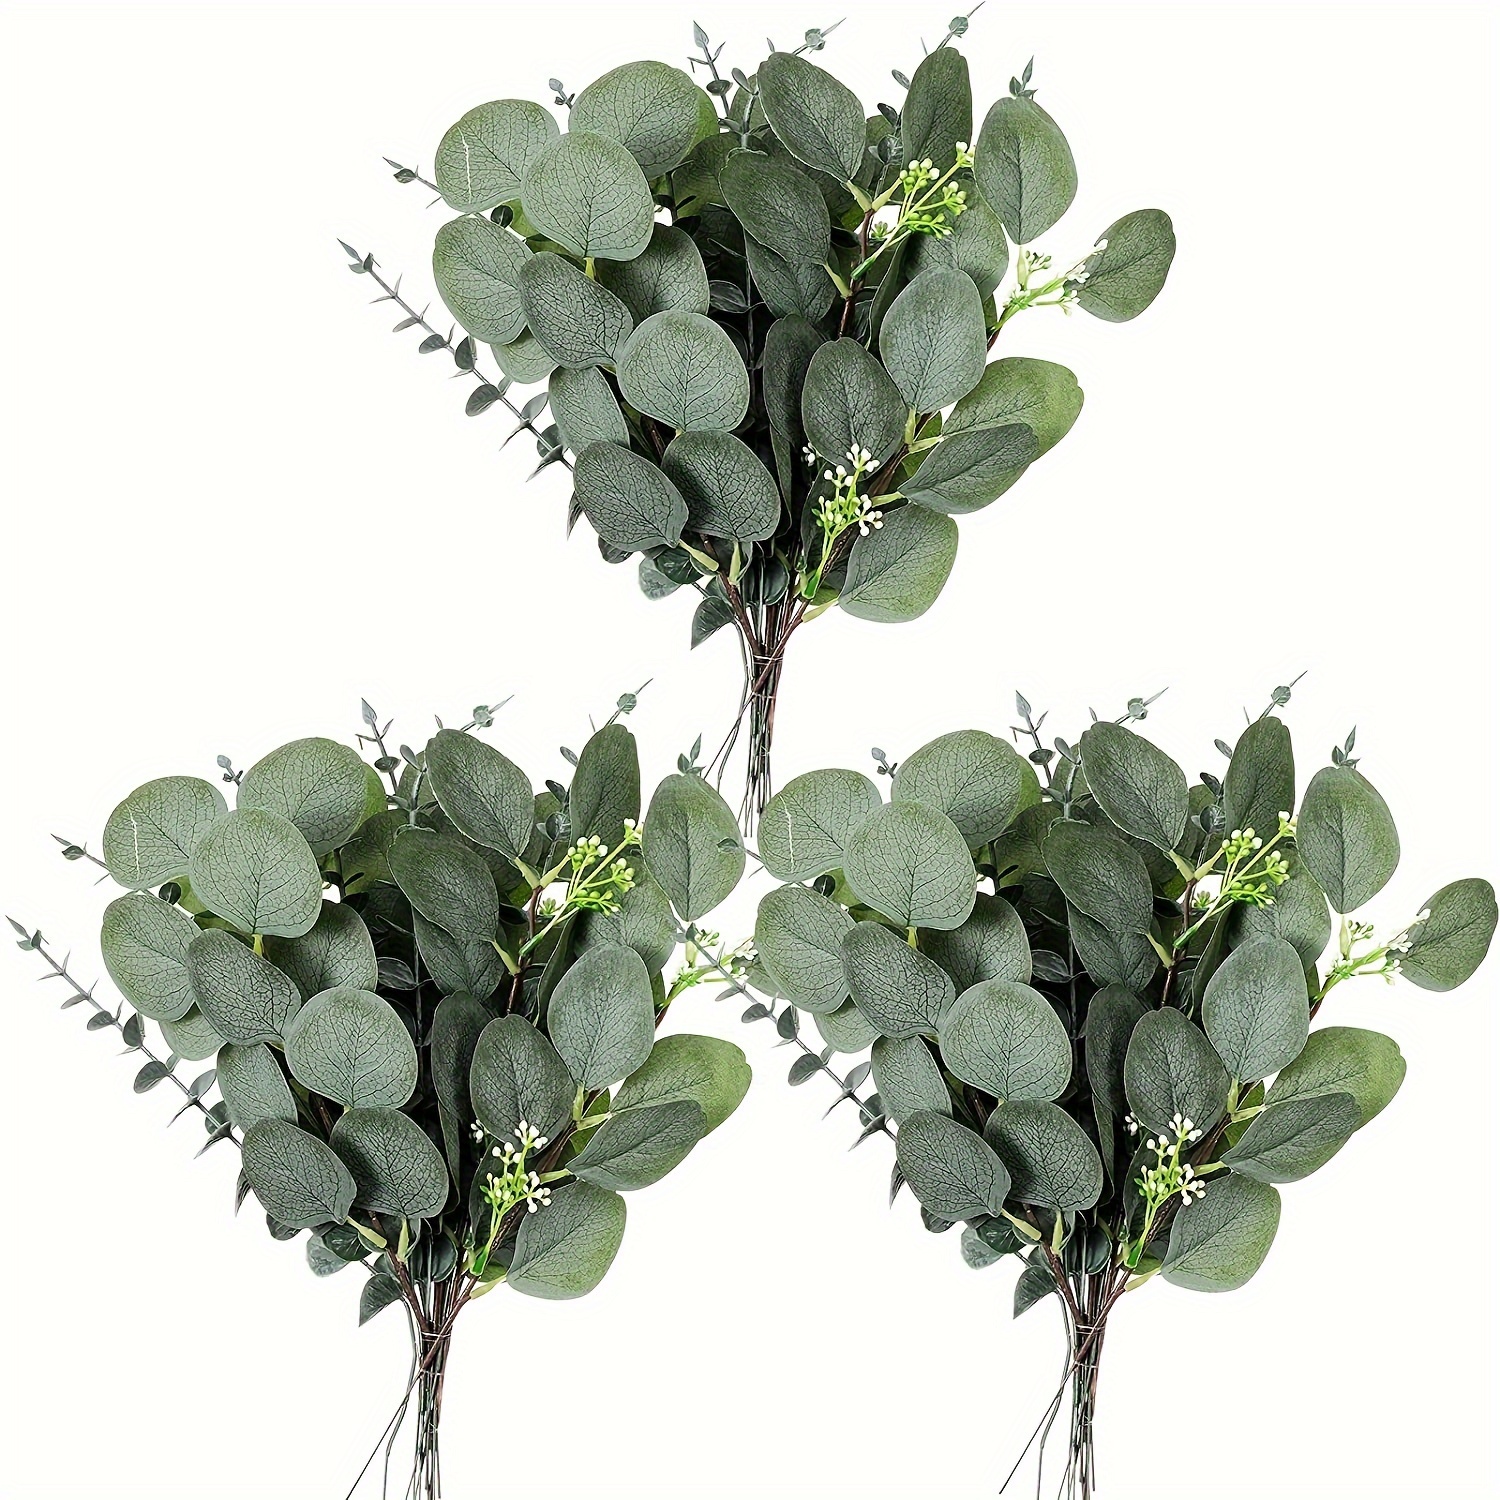 

25pcs Artificial Flowers, Mixed With Artificial Eucalyptus Leaves Stems, Fake Eucalyptus Leaves Spray Silvery Eucalyptus Branch, Artificial Green Plant Branches For Party Wedding Spring Decoration